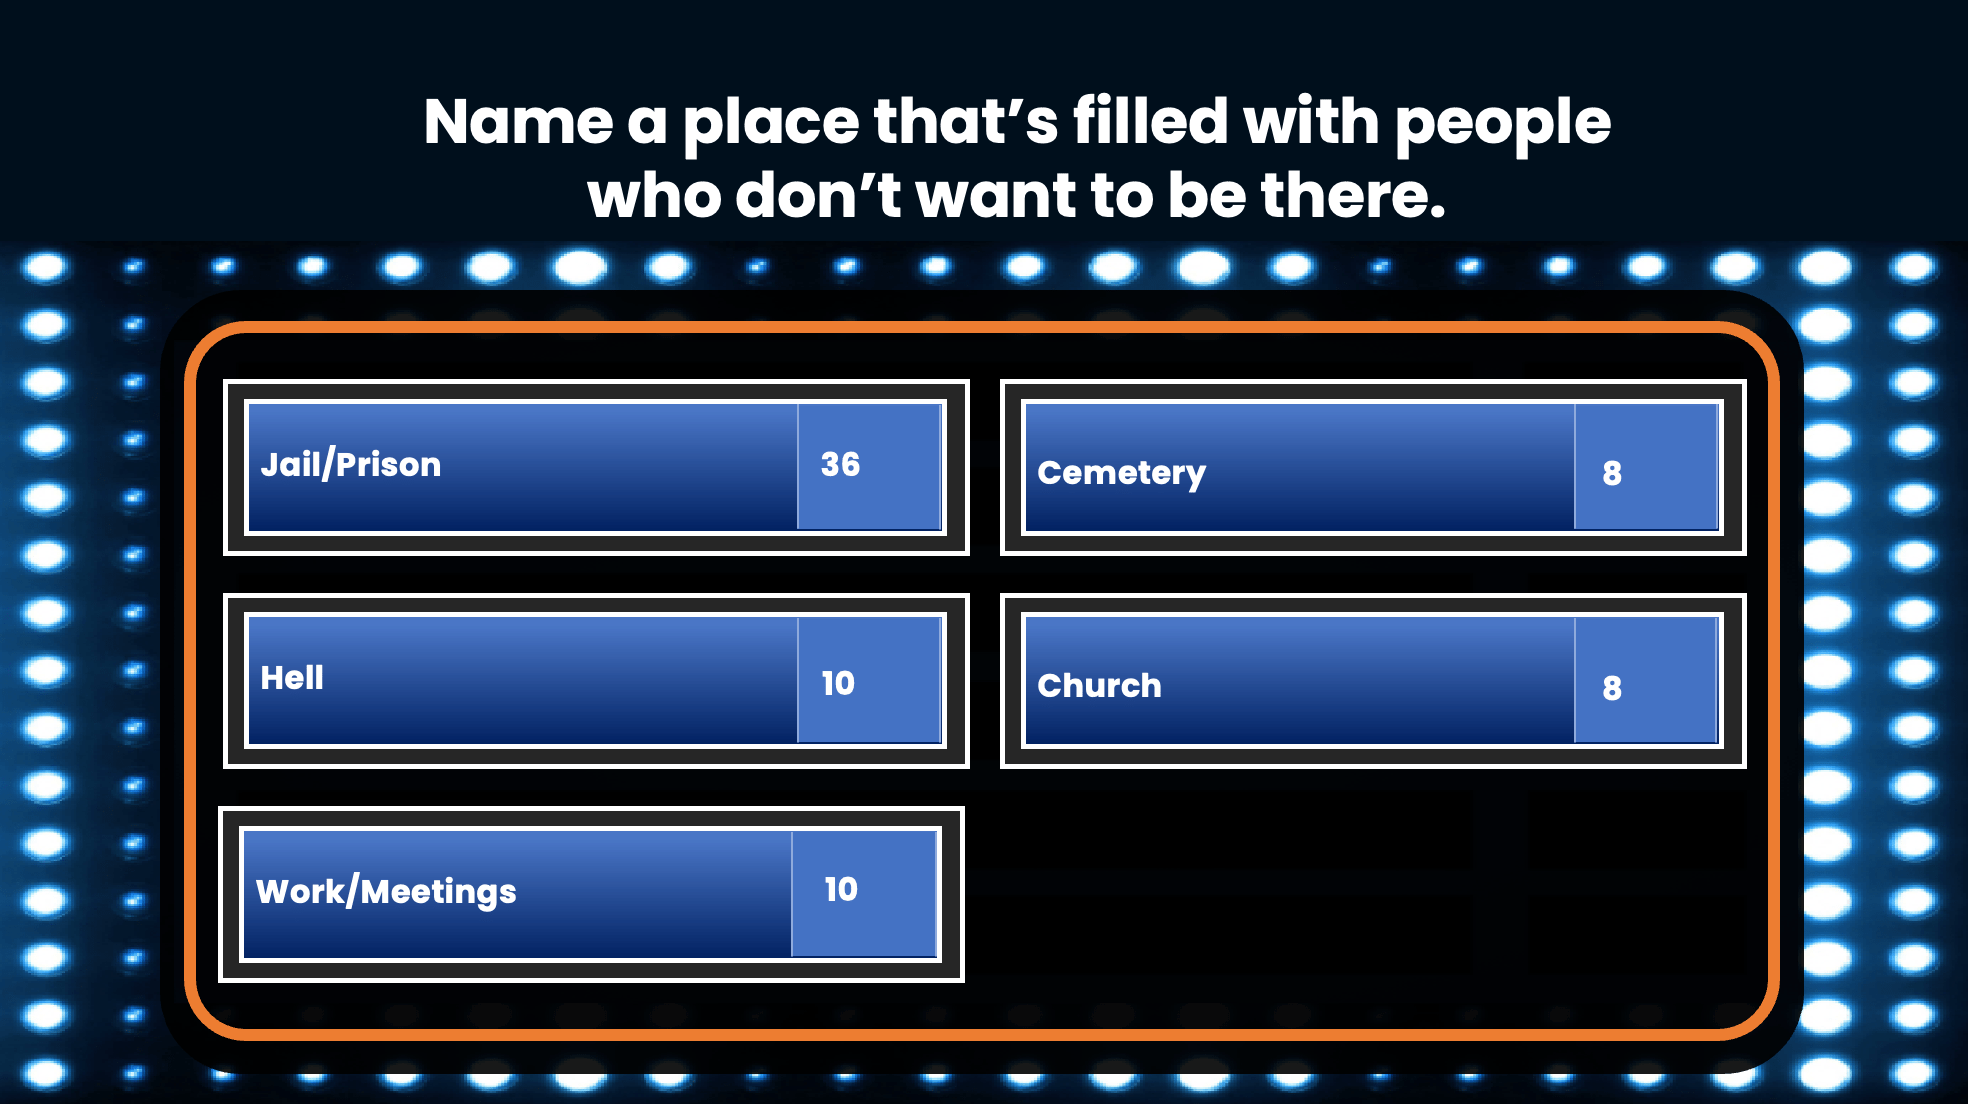 Family Feud PowerPoint